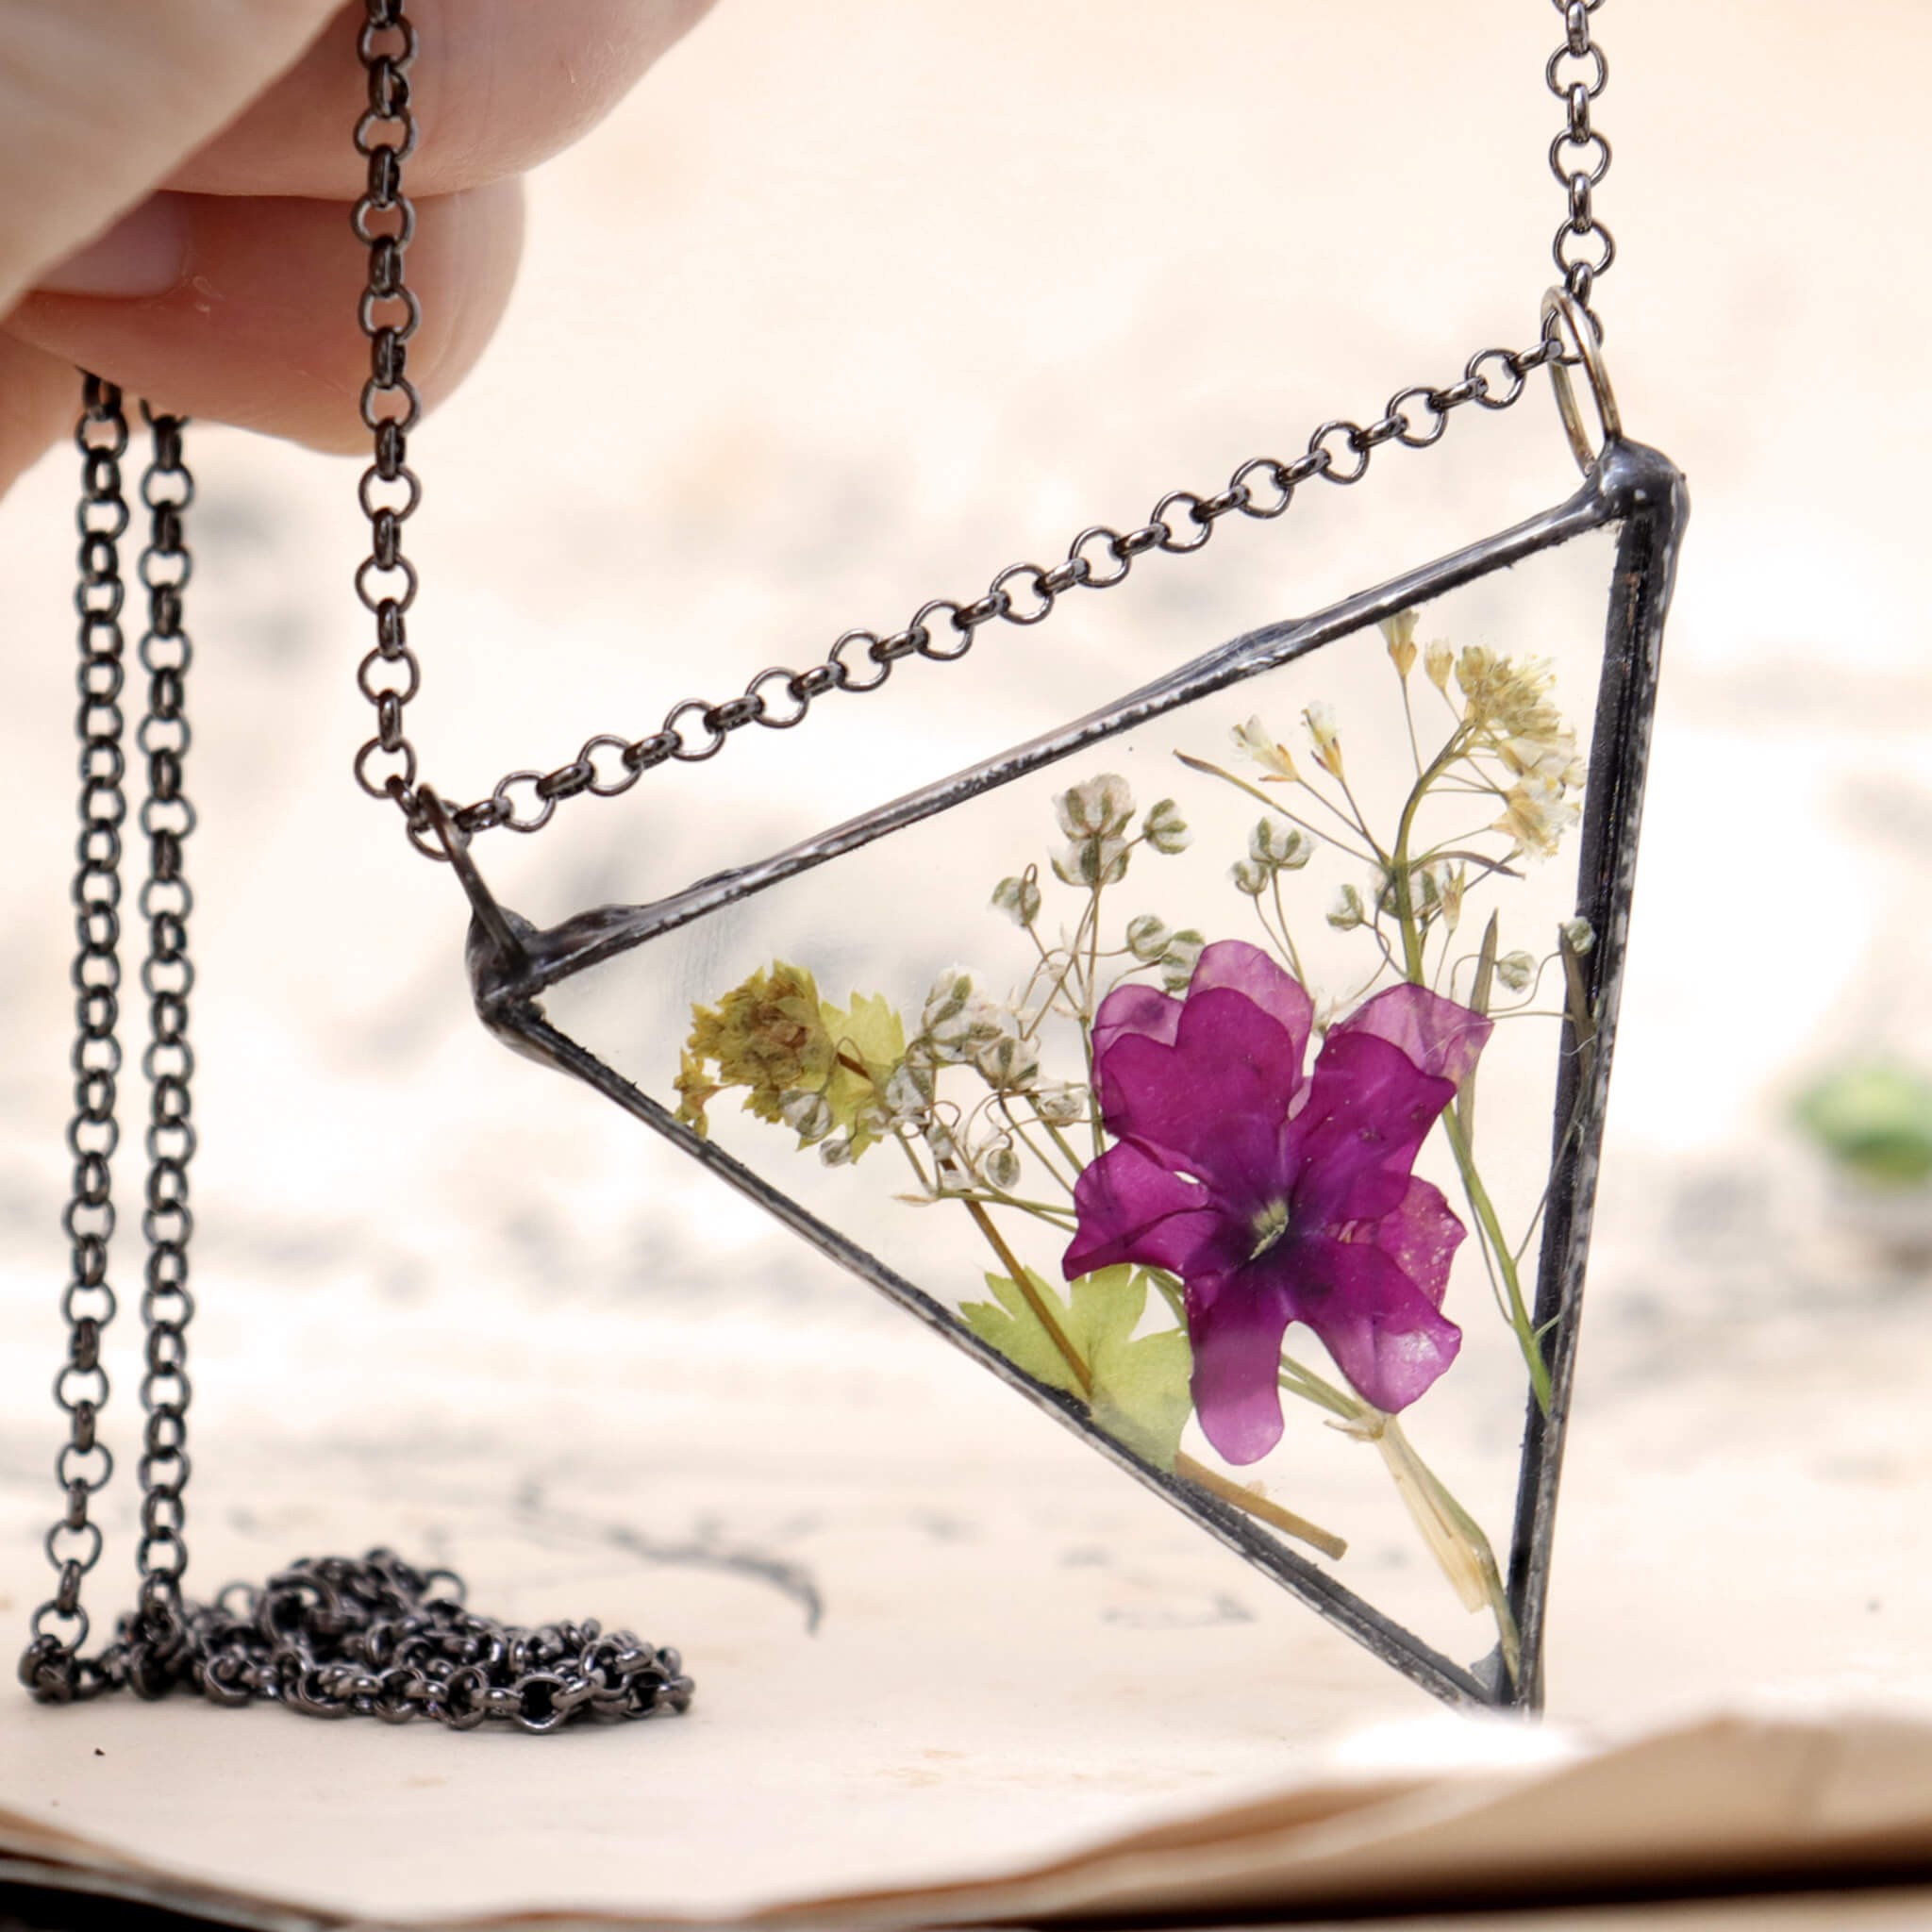 Pressed Flower Necklace, Resin Jewelry, Dried Flower Jewellery, Minimalist  Jewelry, Botanical Necklace, Valentine Gift With Natural Touch 